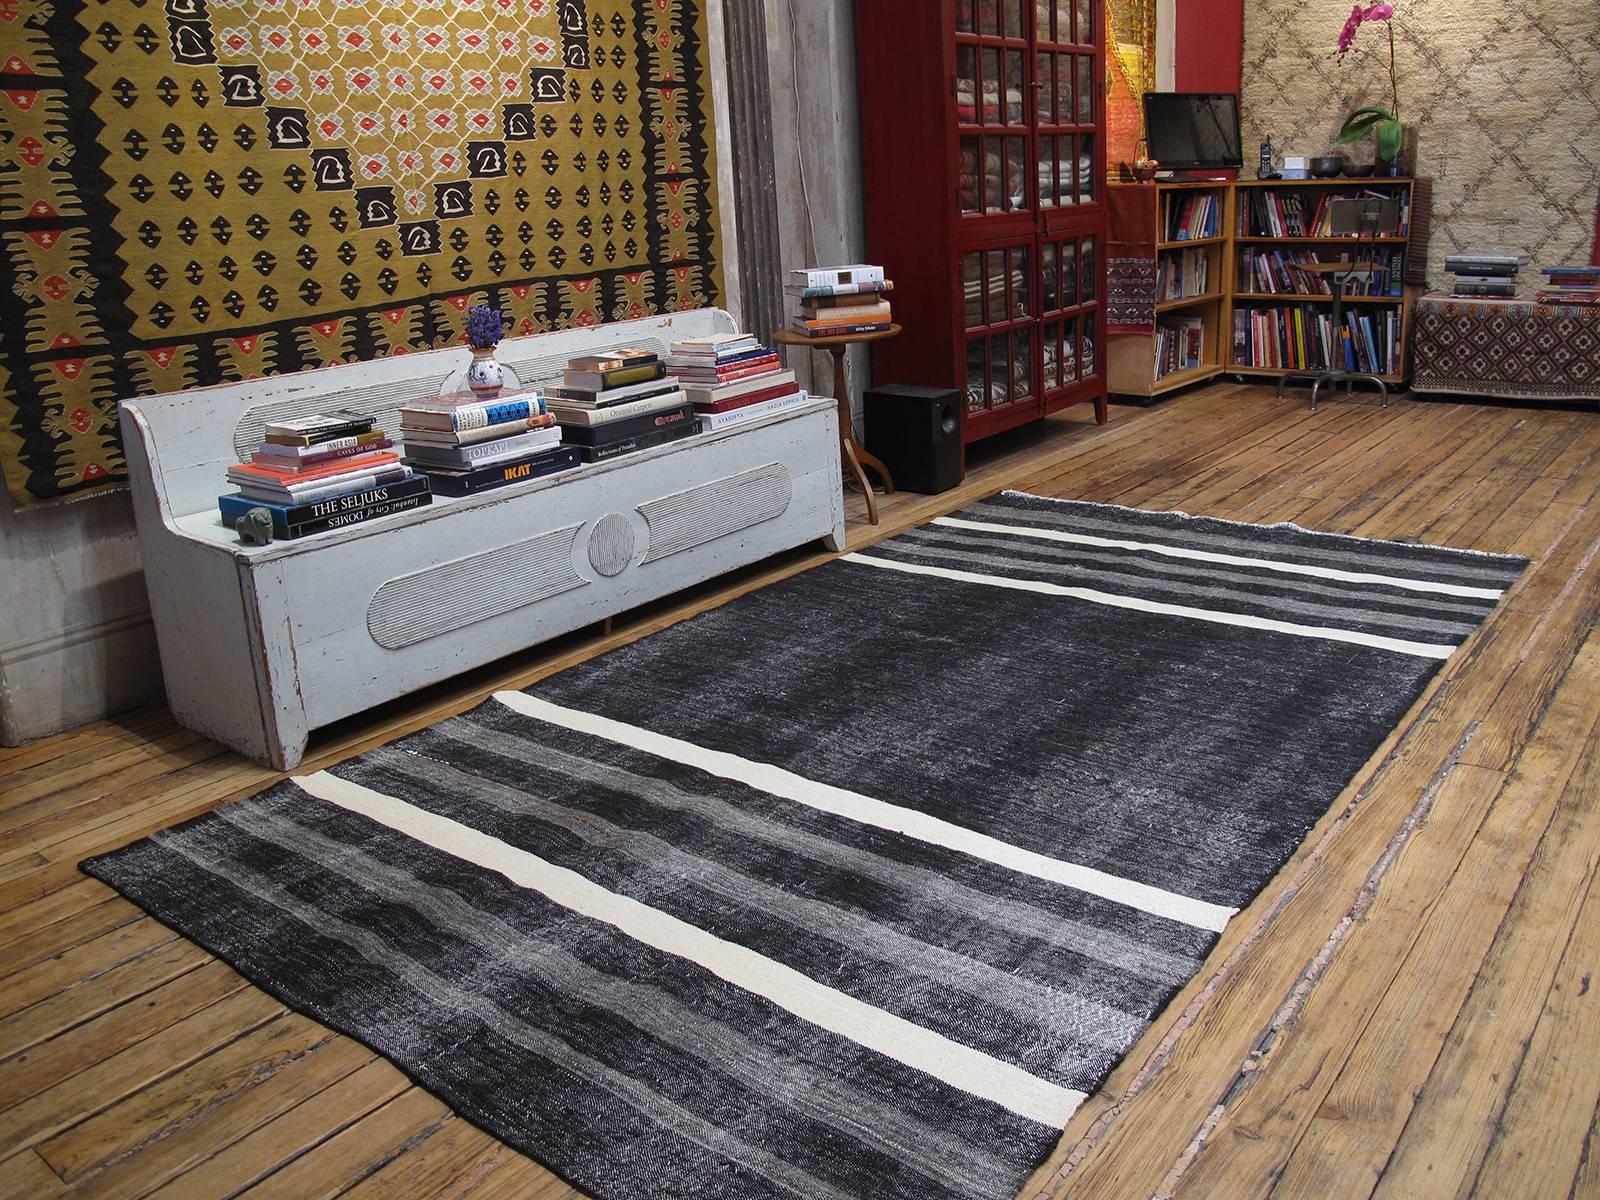 A large, Primitive, dramatic tribal flat-weave woven entirely with goat hair in natural dark brown (almost black), gray and ivory bands. Woven as a utilitarian floor cover, it has a rough texture. A simple, authentic weaving with great Modern or